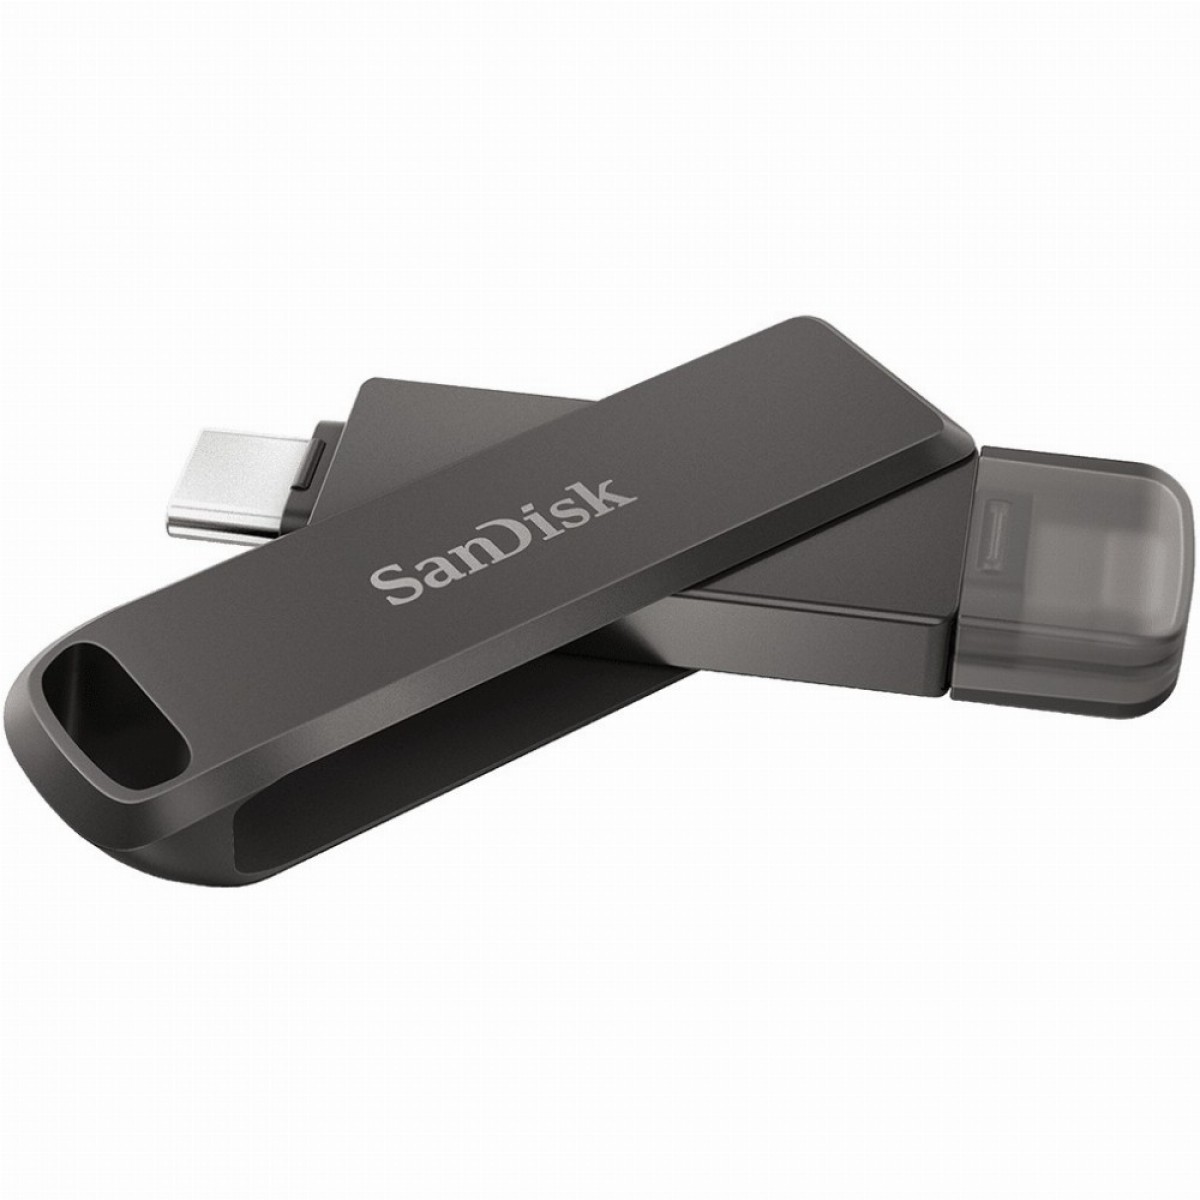 https://www.discobianco.fr/pic/STICK-128GB-3-0-SanDisk-iXpand-Luxe-Duo-USB-C-Apple-Lightning-black-FR.291774a.jpg